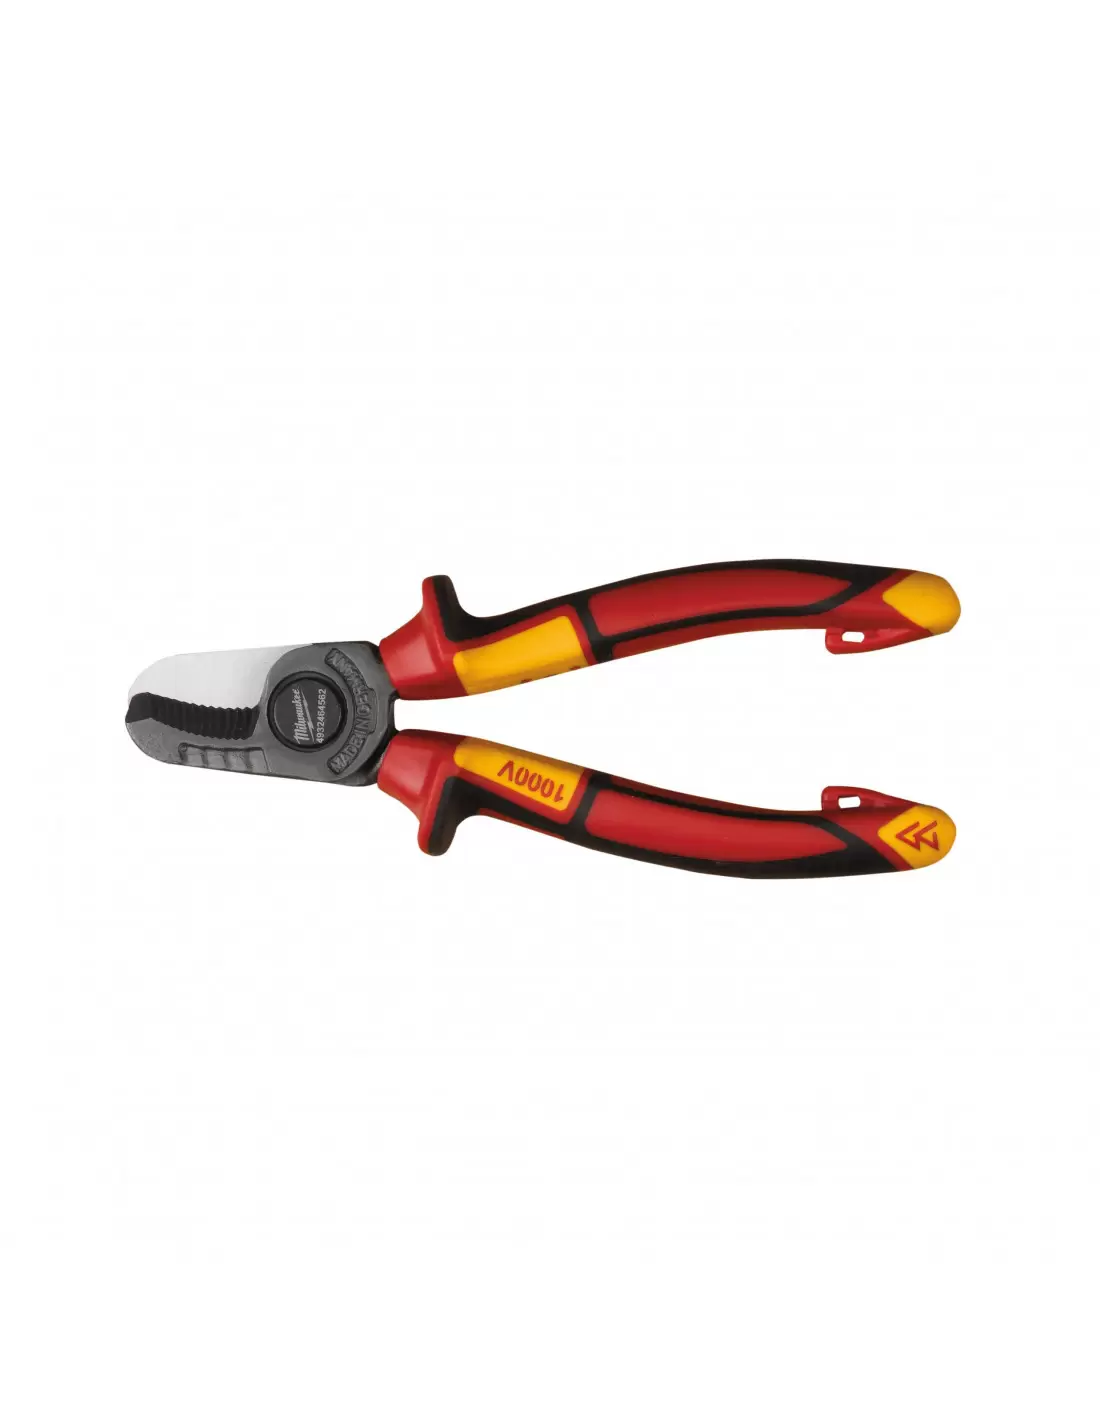 Pince coupe cable isolée 160mm, 4932464562 - Milwaukee